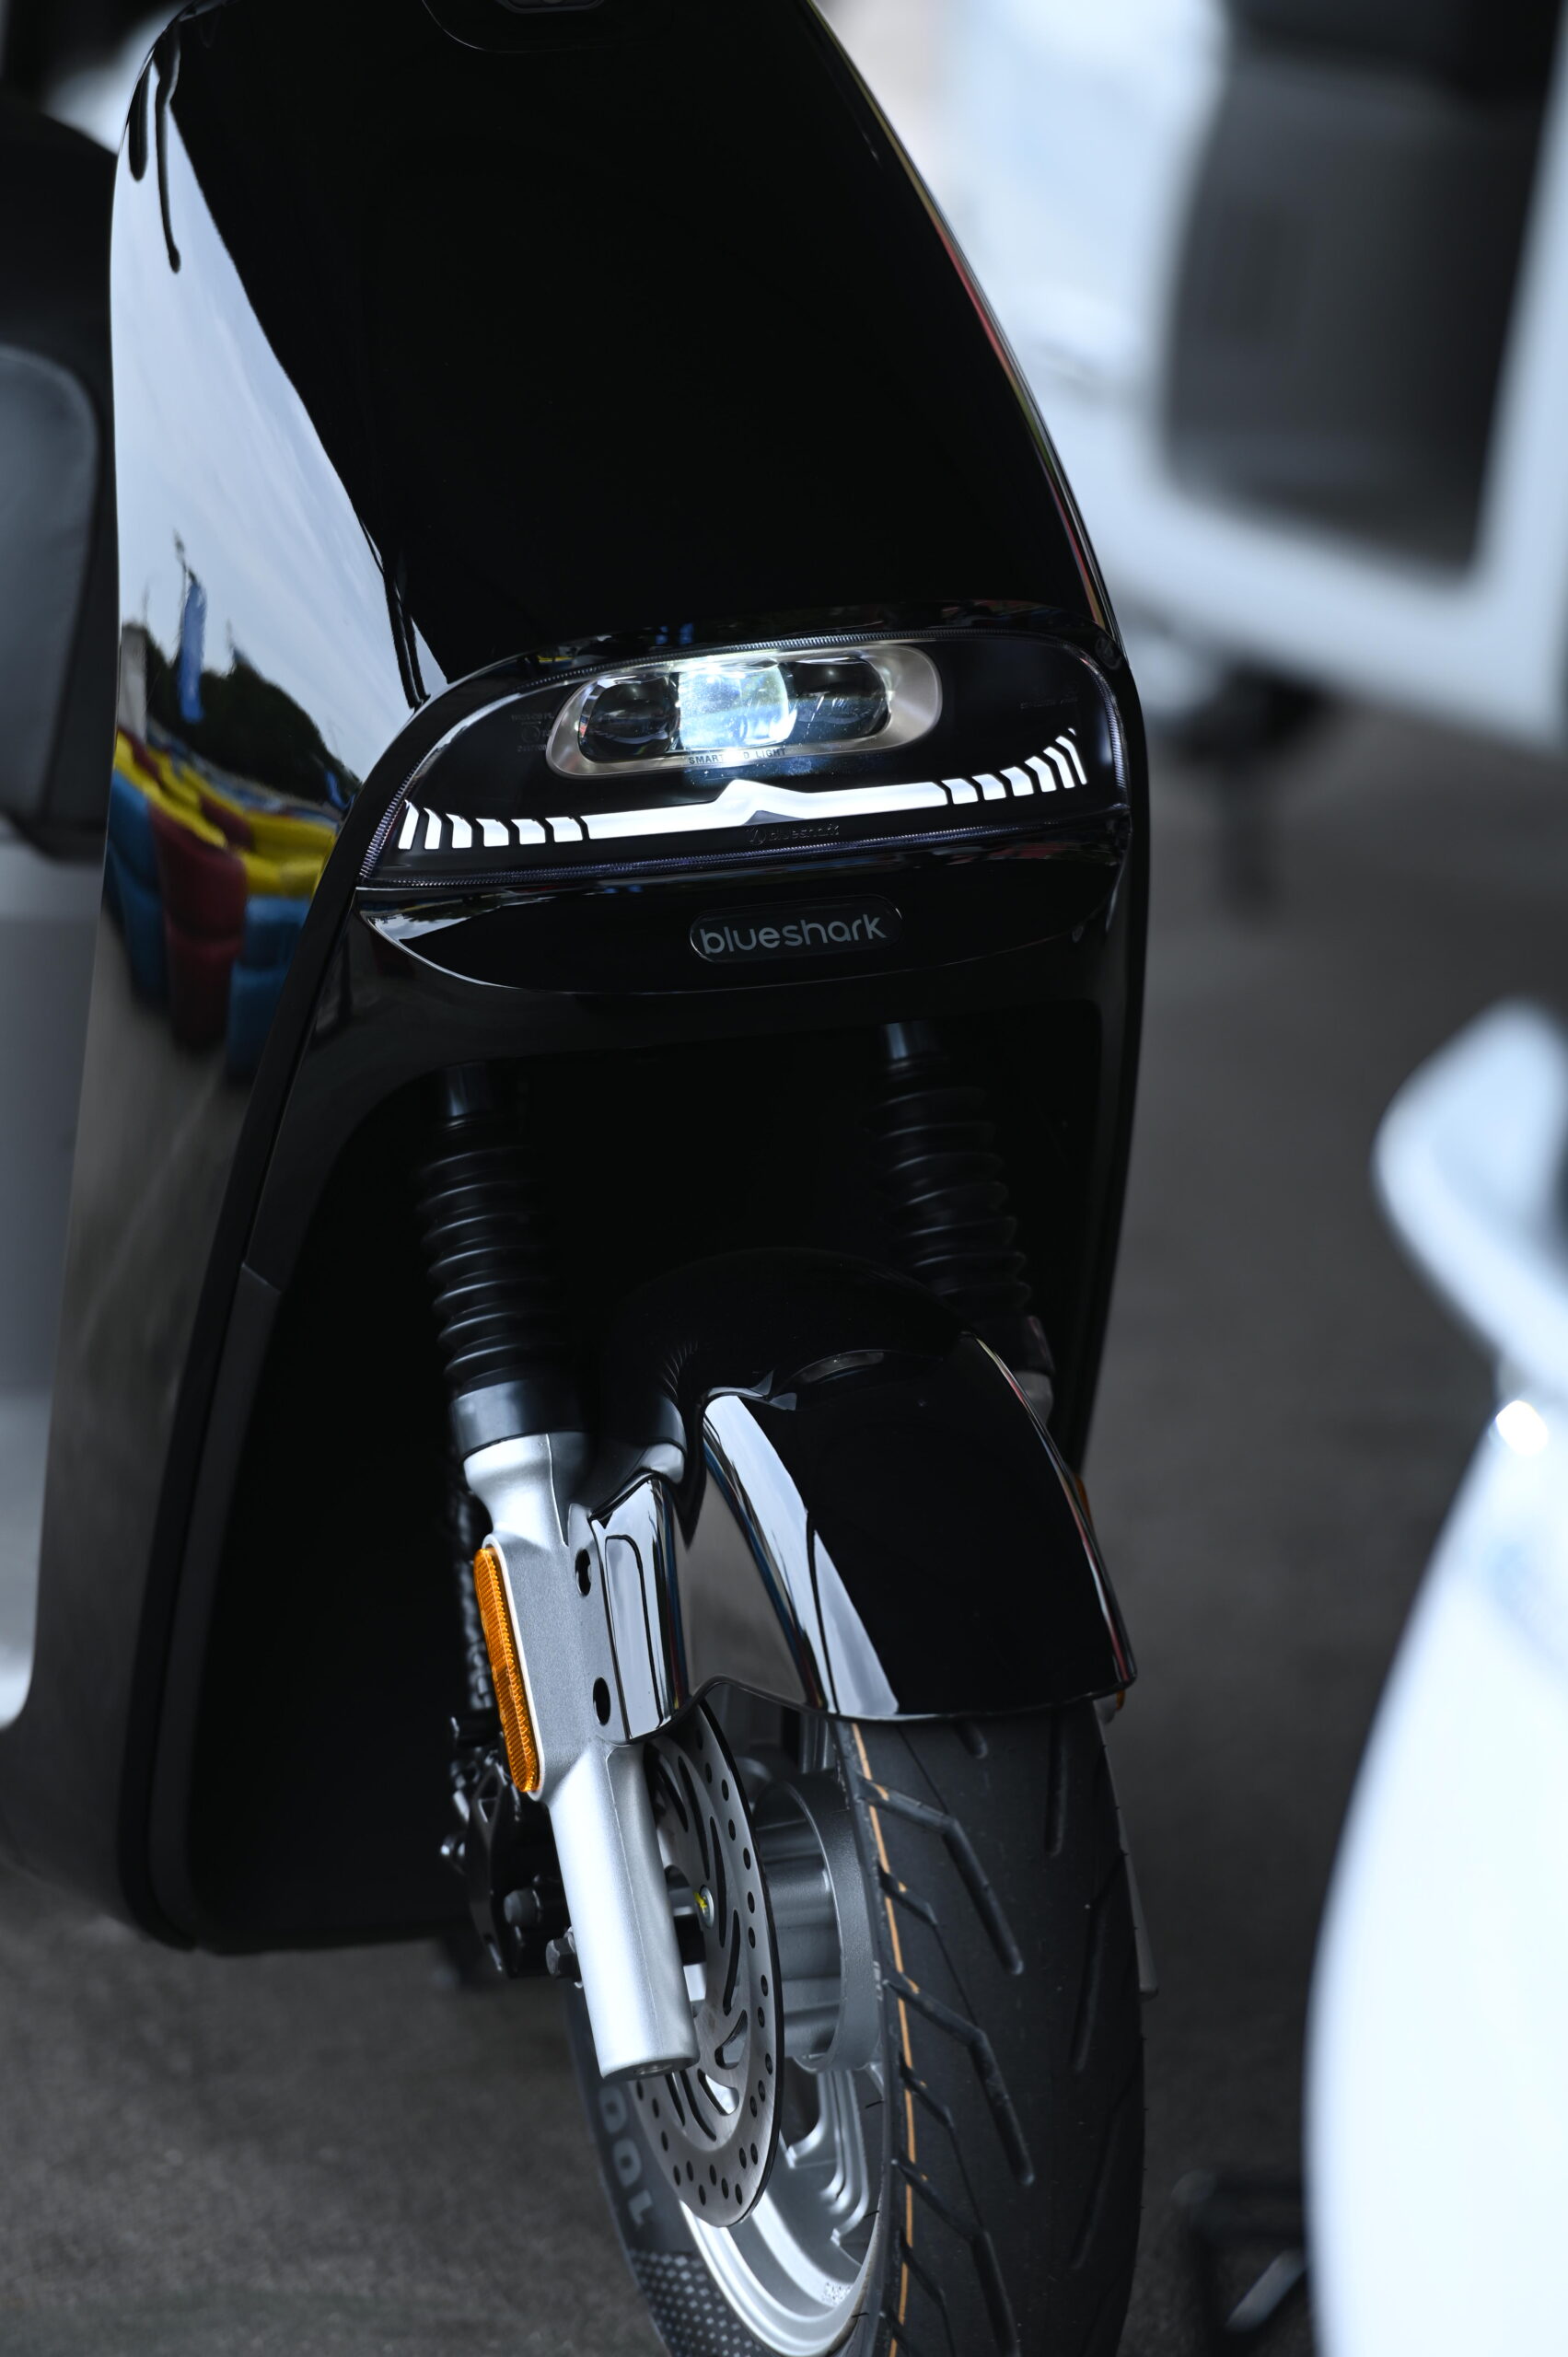 14. Bluesharks smart electric scooter arrives in Malaysia with cutting edge technology to revolutionise urban mobility. scaled